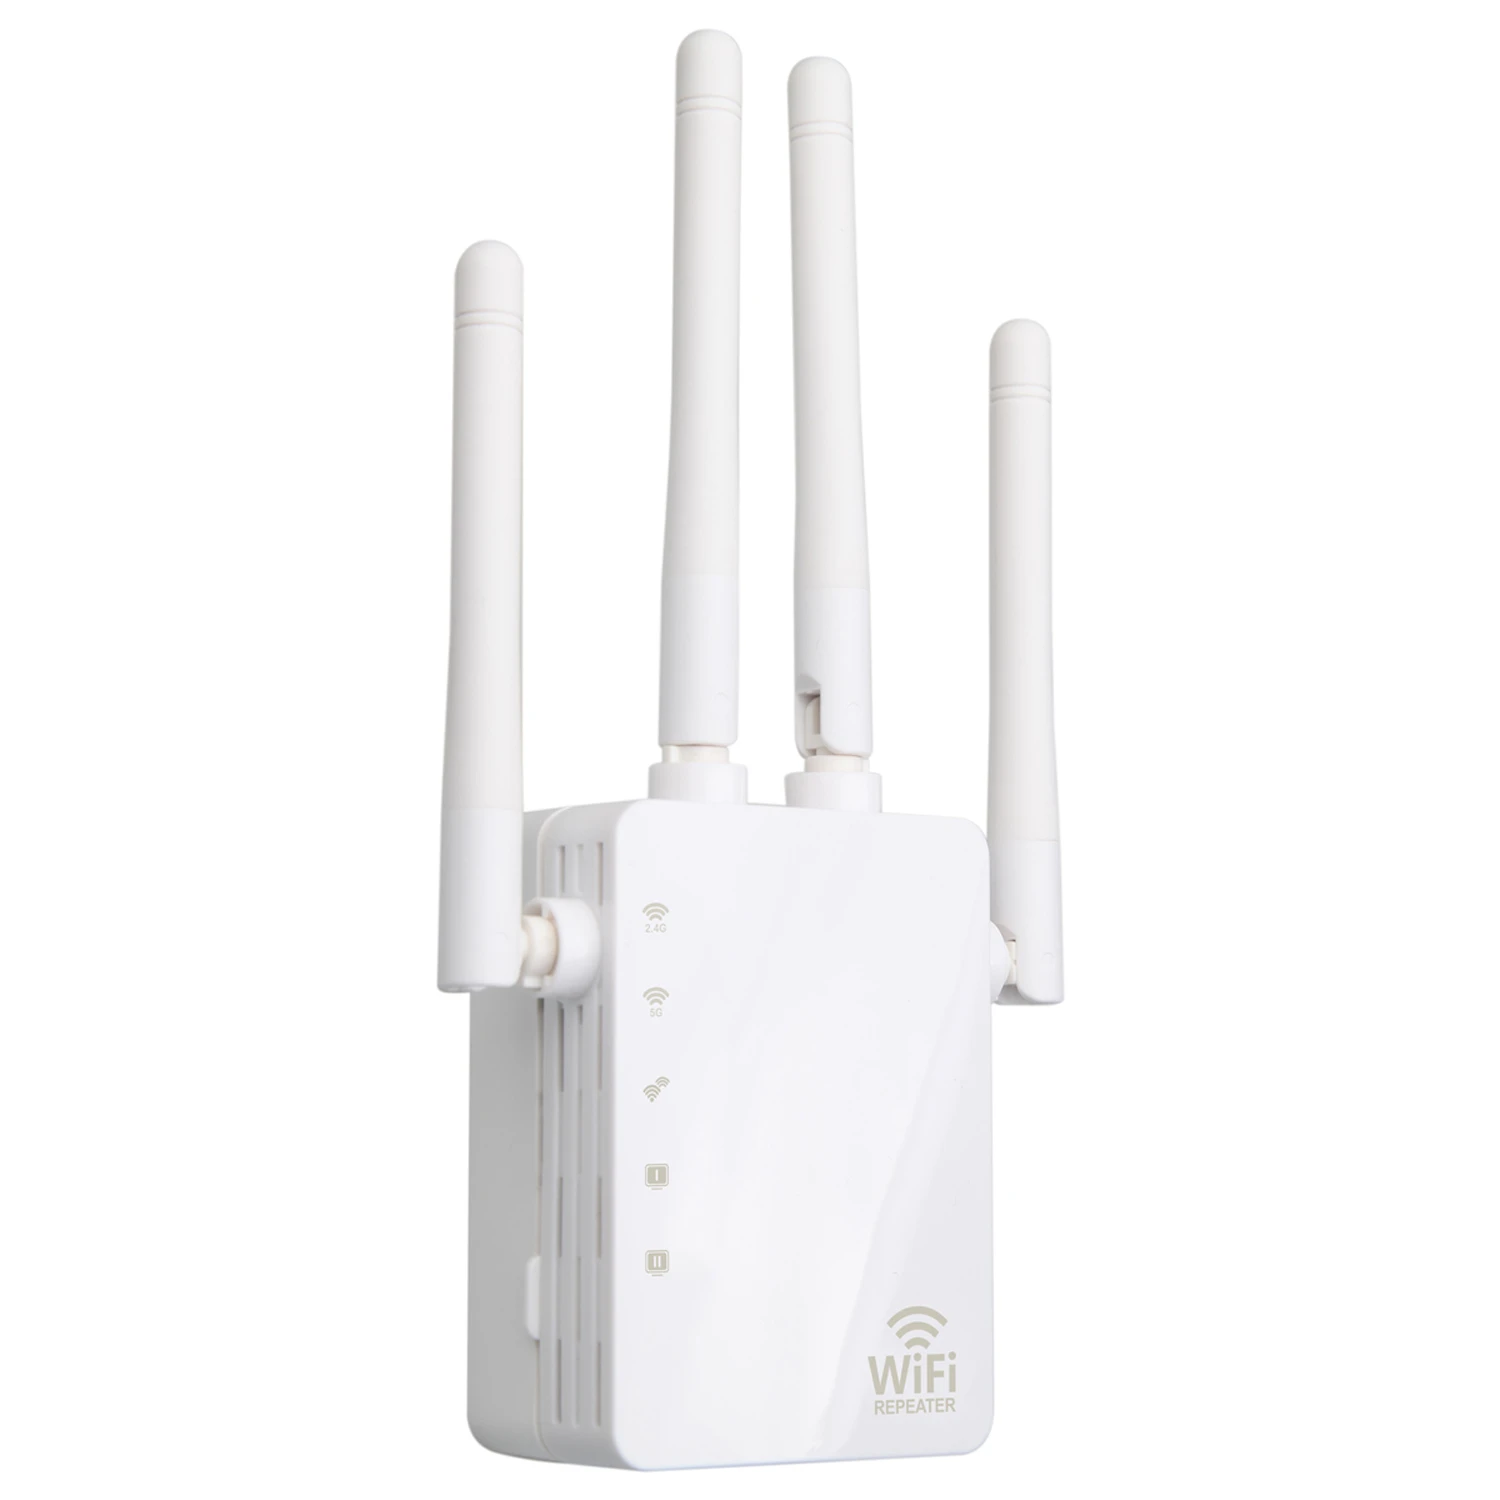 2020 New Arrival WD-R1200U 1200M 2.4 &amp; 5.0Ghz Dual Band Router Home Network Supplies  wifi repeater with 4 Antennas